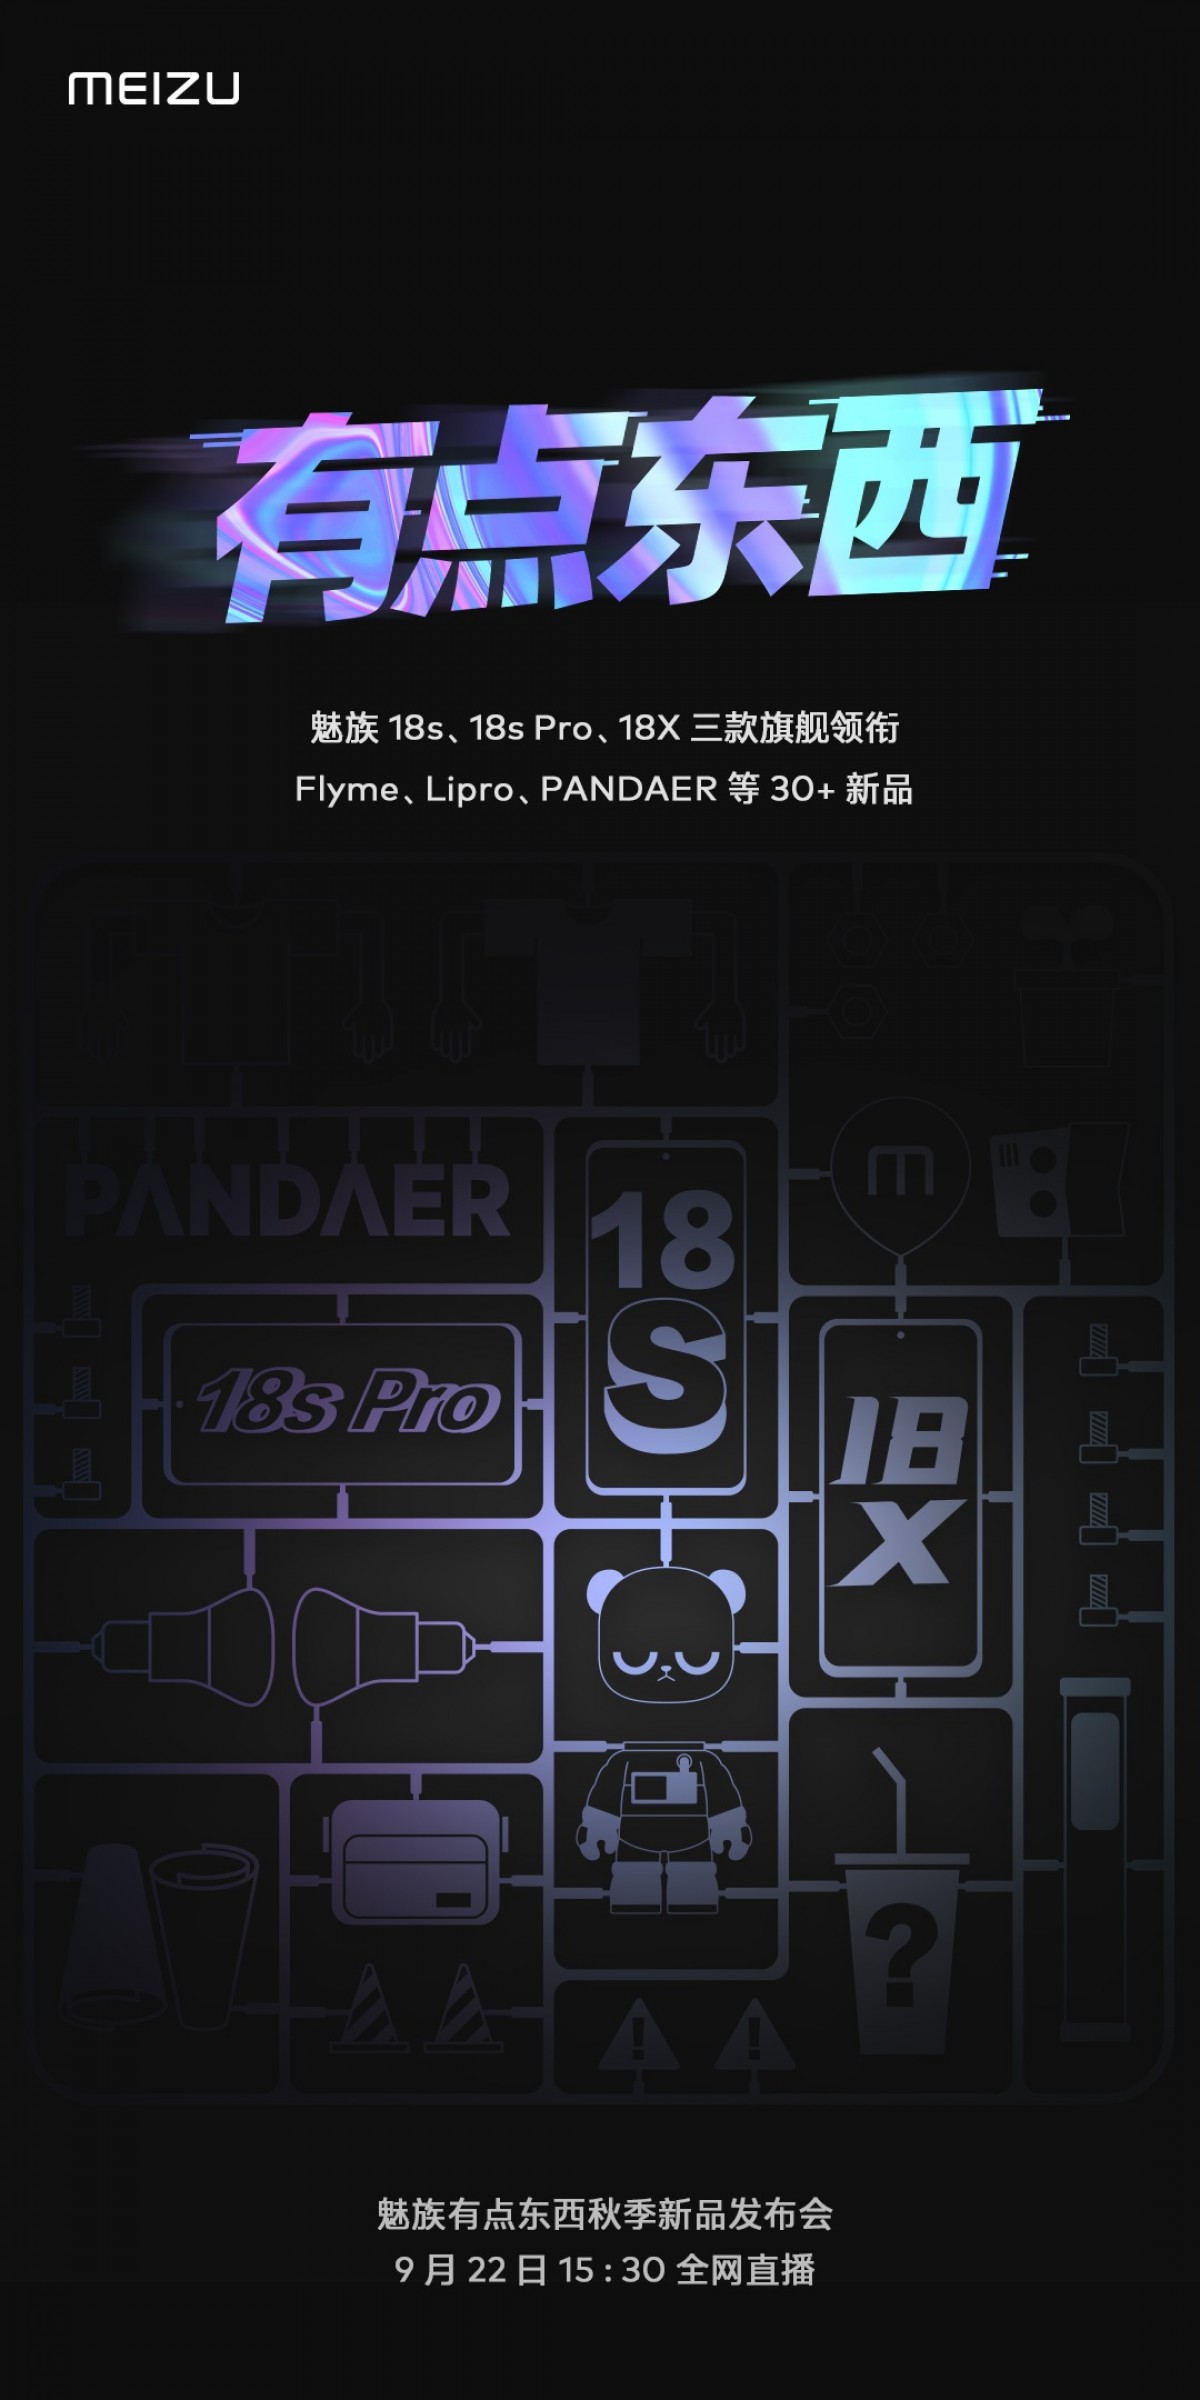 Meizu 18s, 18s Pro coming on September 22, Meizu 18x to join them